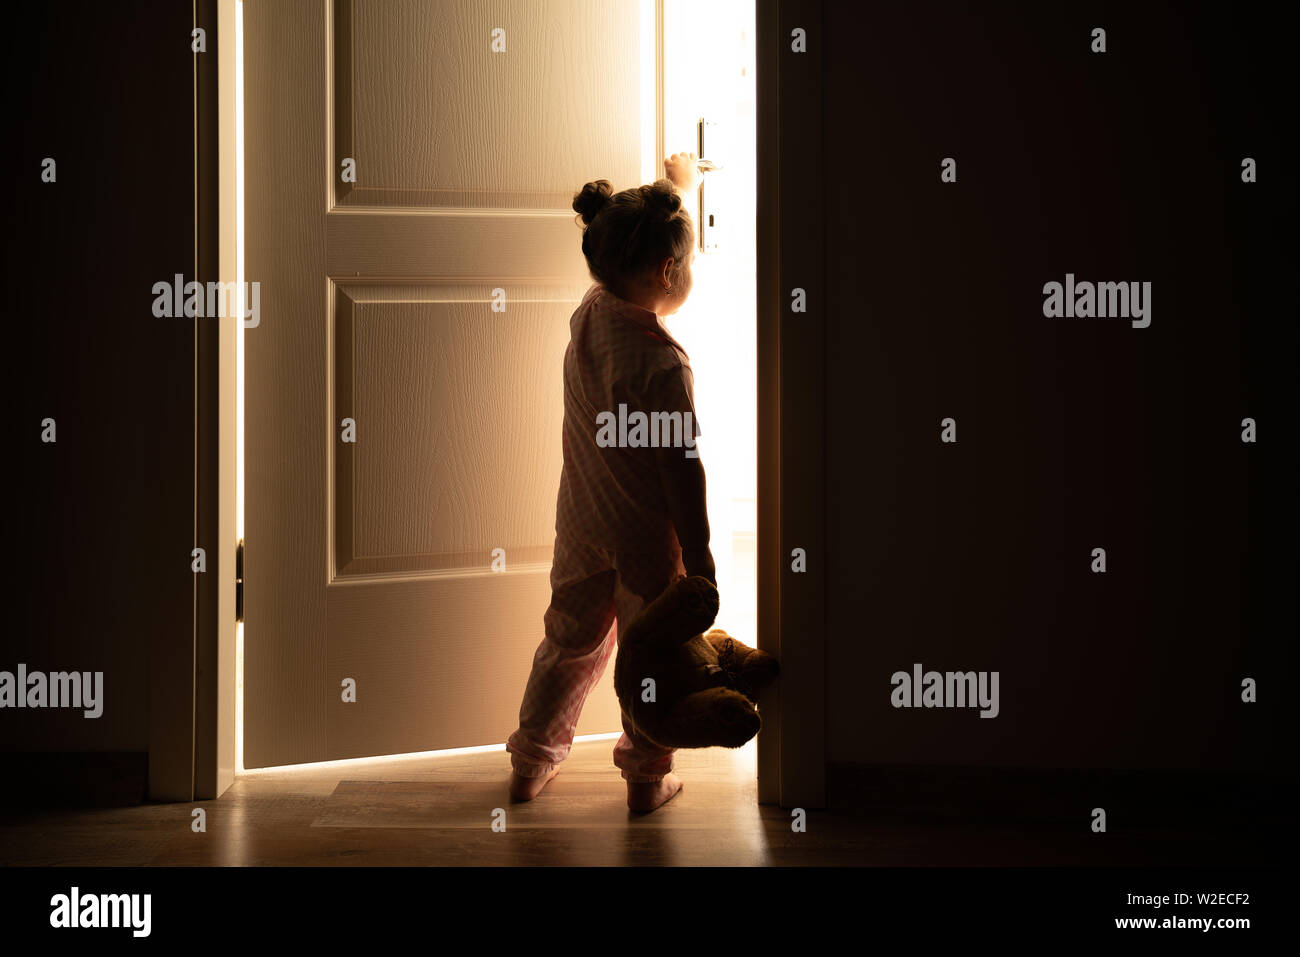 Little girl opens the door to the light in darkness. Stock Photo